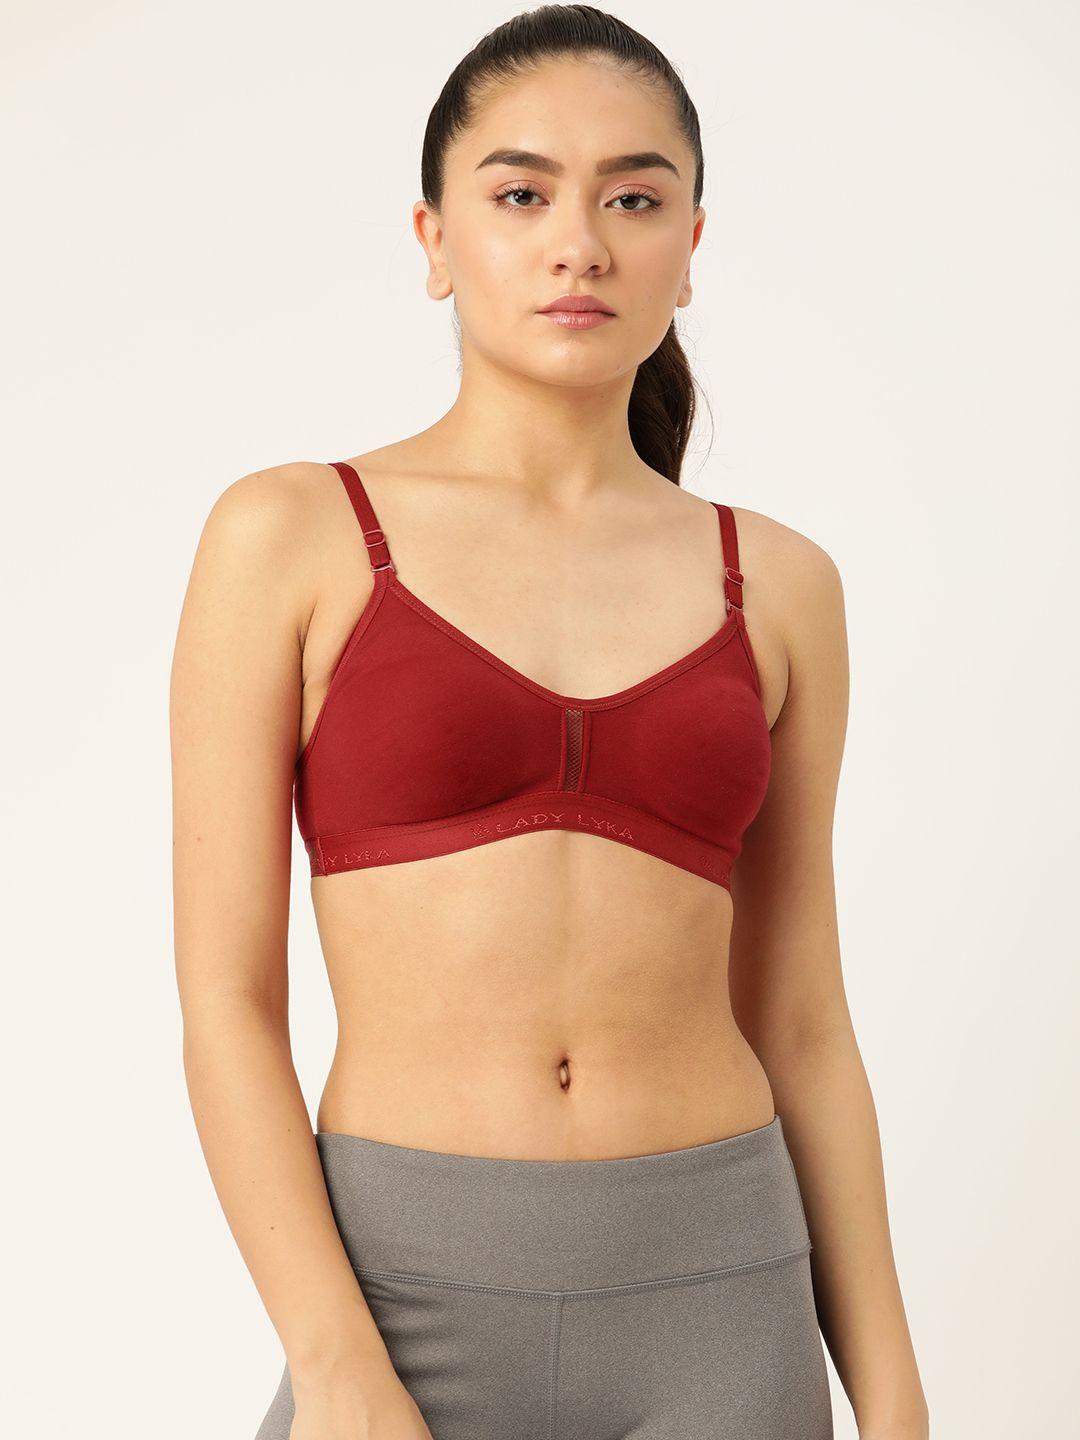 lady lyka maroon solid cotton workout bra-full coverage non-wired non padded